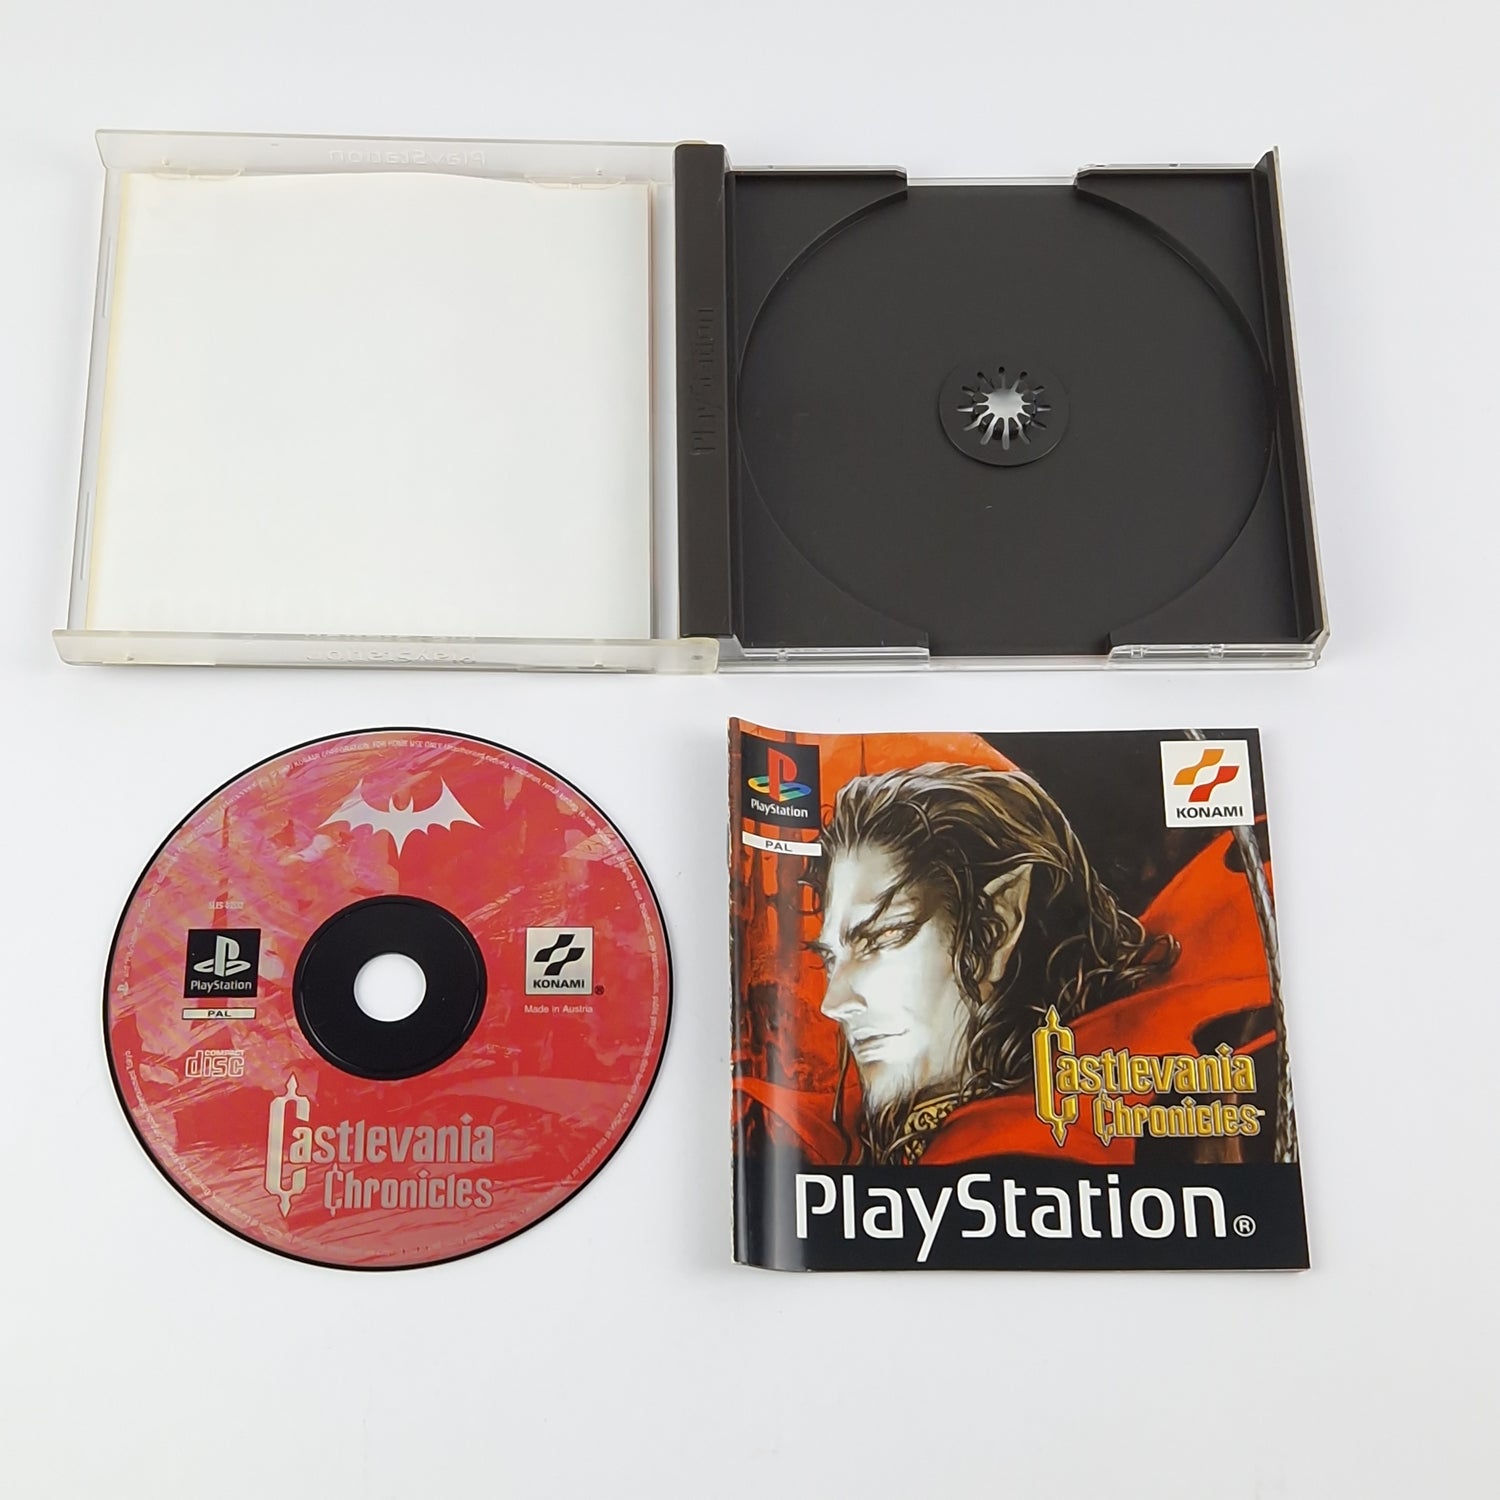 Sony Playstation 1 Spiel : Castlevania Chronicles - OVP Anleitung PAL | PS1 PSX